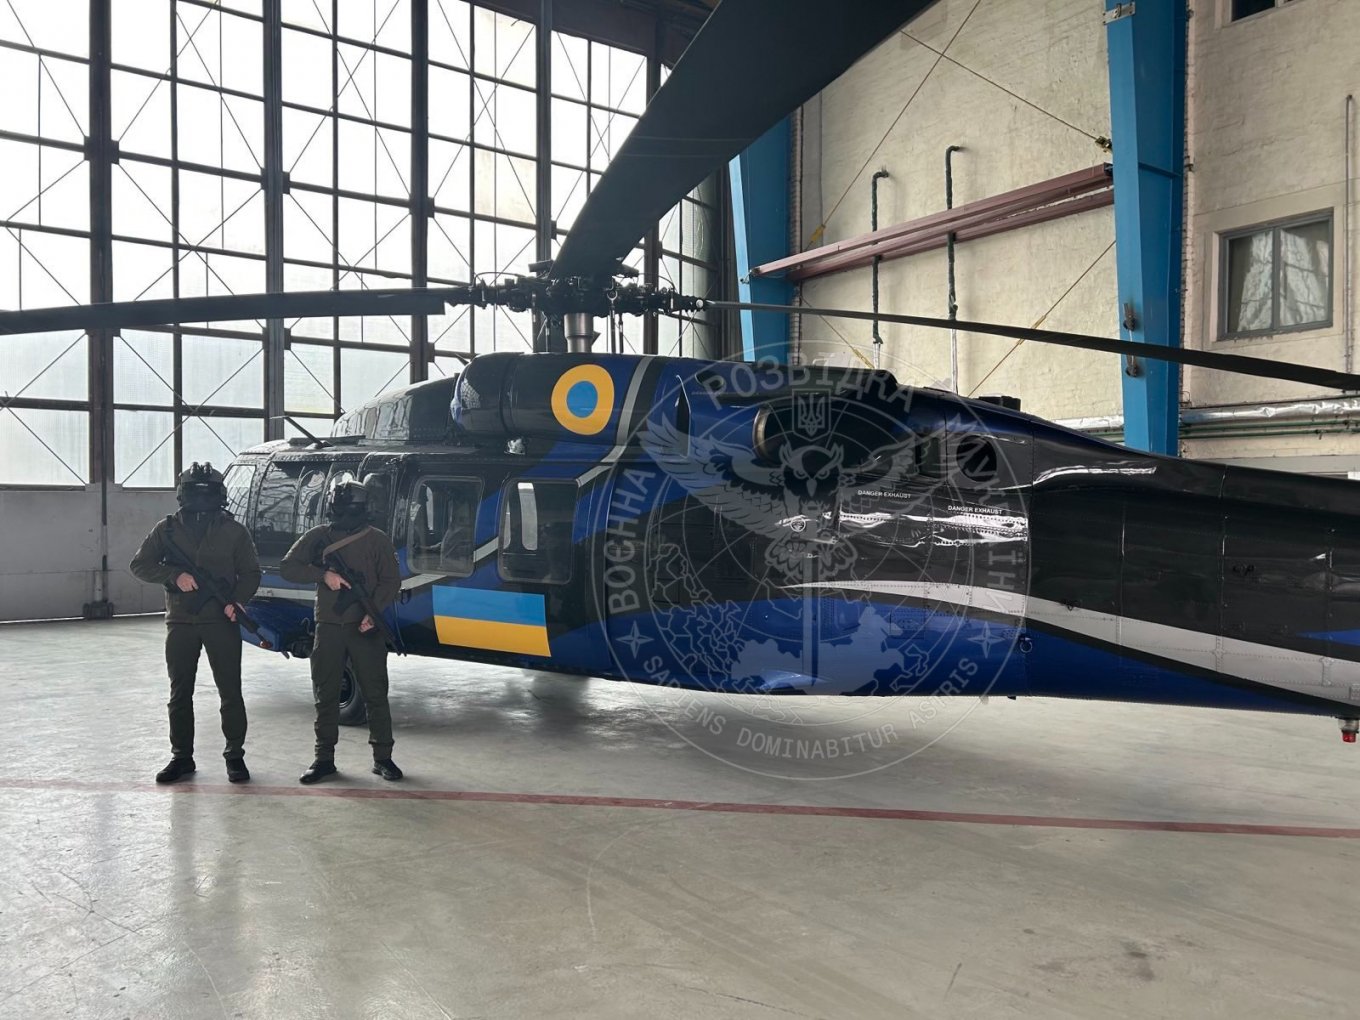 ABC News showed how the American Black Hawk helicopter serves the Ukrainian military, Defense Express